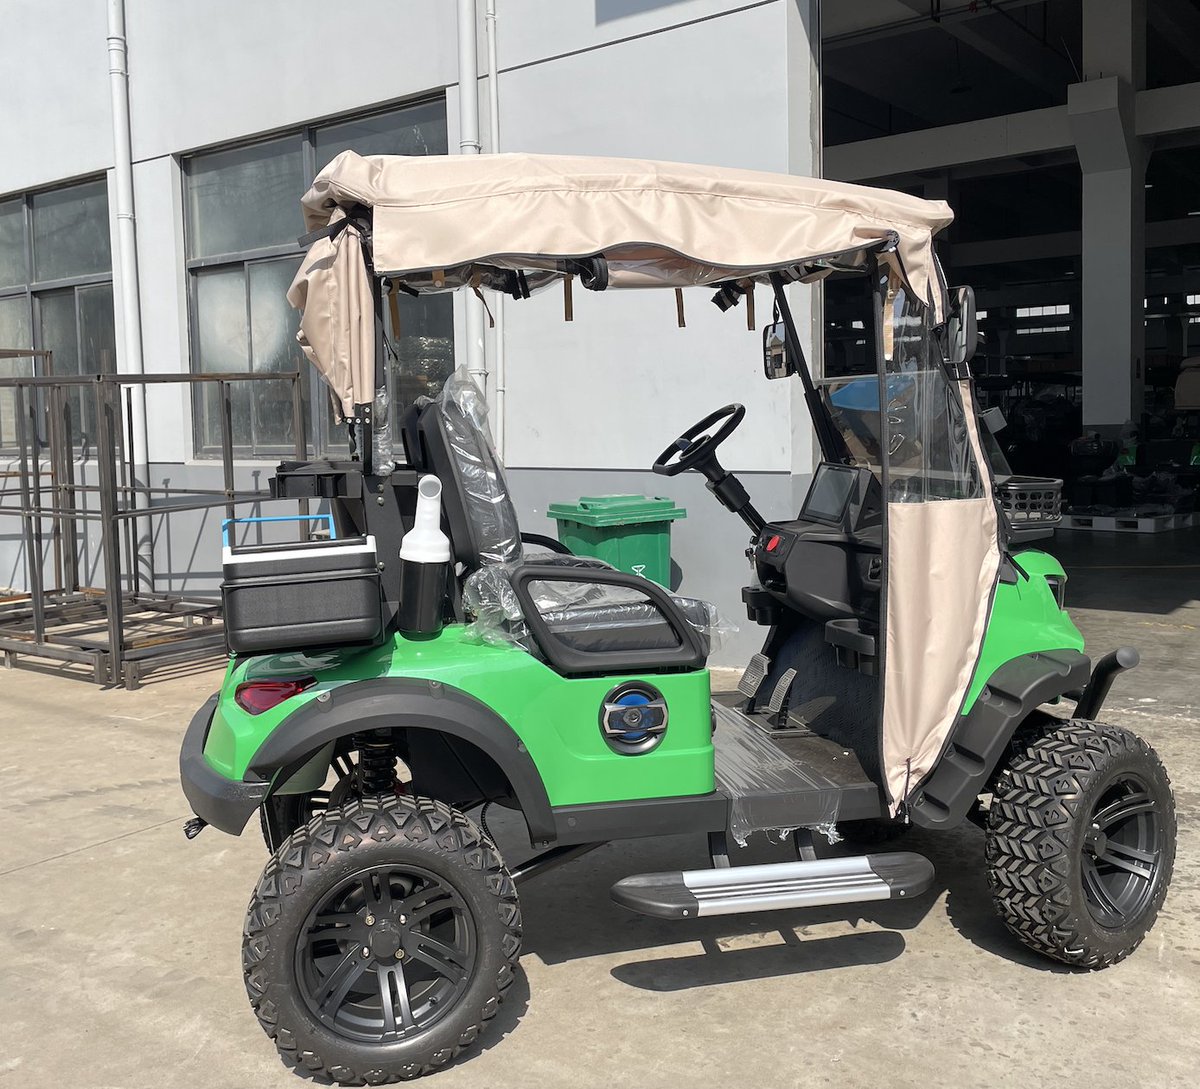 electric golf cart with customized Soft closure. 
Contact us for more information on how to become a dealer. 
email: info@linkseride.com

#golf #golfday #golfchampionship #golfcarts #golfcarthire #golfcartevents #golfcartlife #golfcartlifestyle #golfcarttyres #golfcartparts